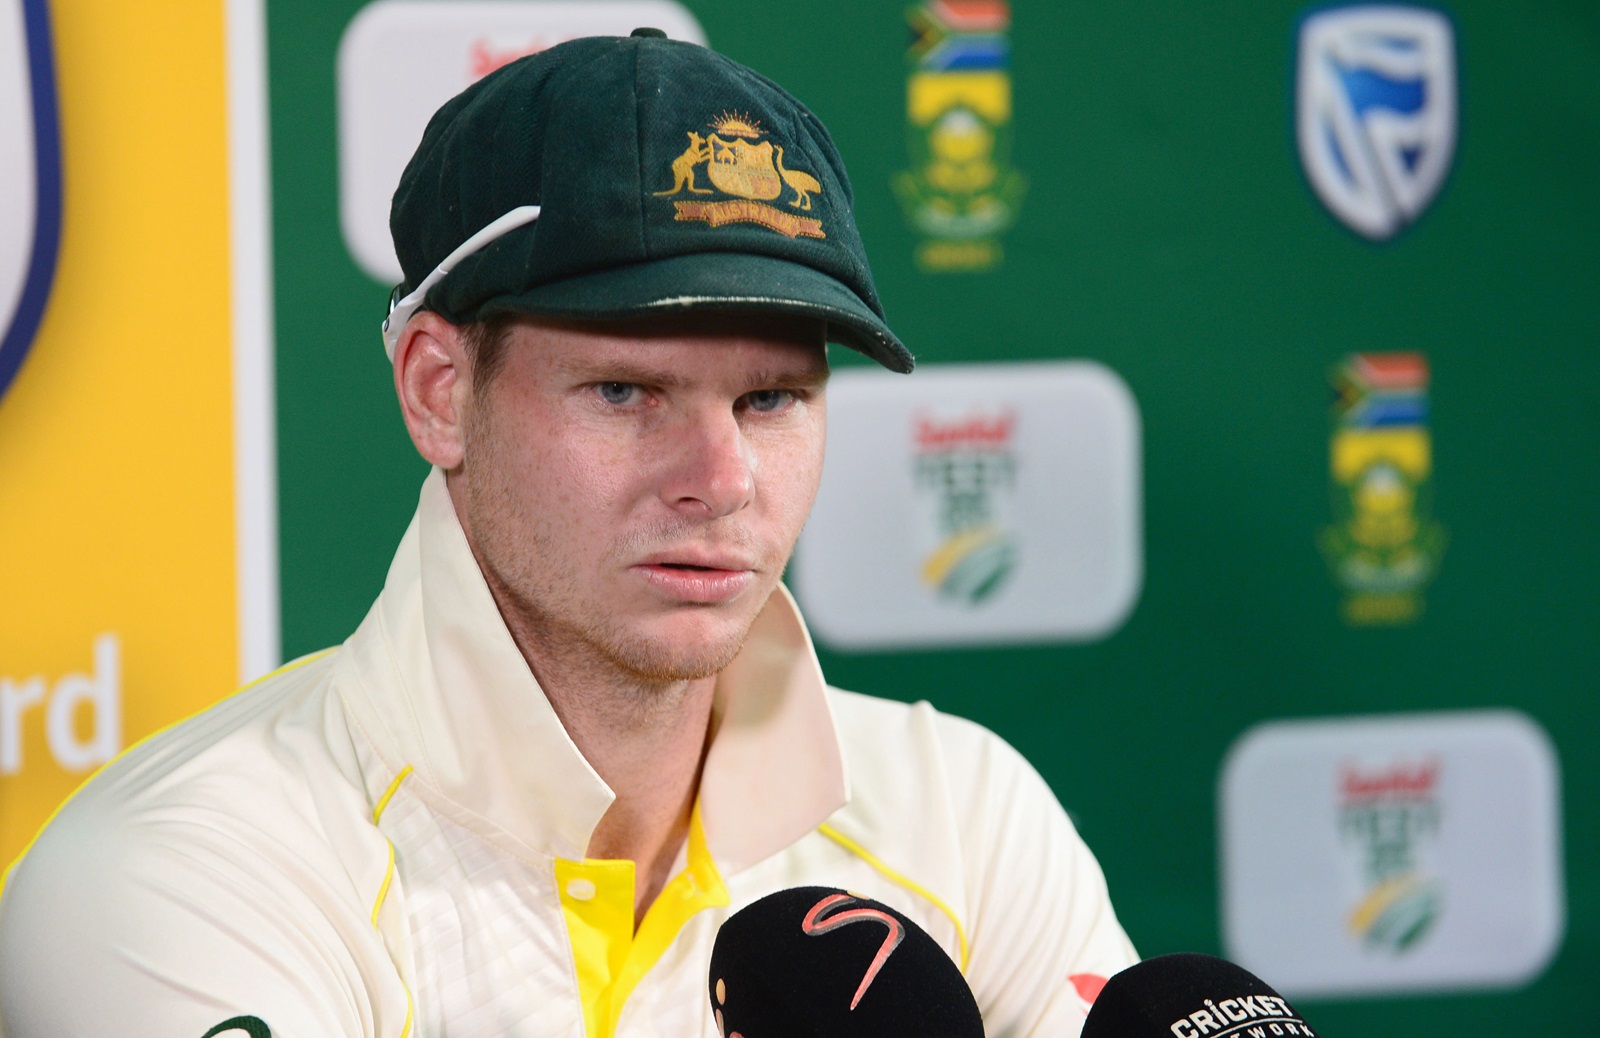 Steve Smith lost credibility, reputation and much more in the ball tampering scandal in 2018 | Getty